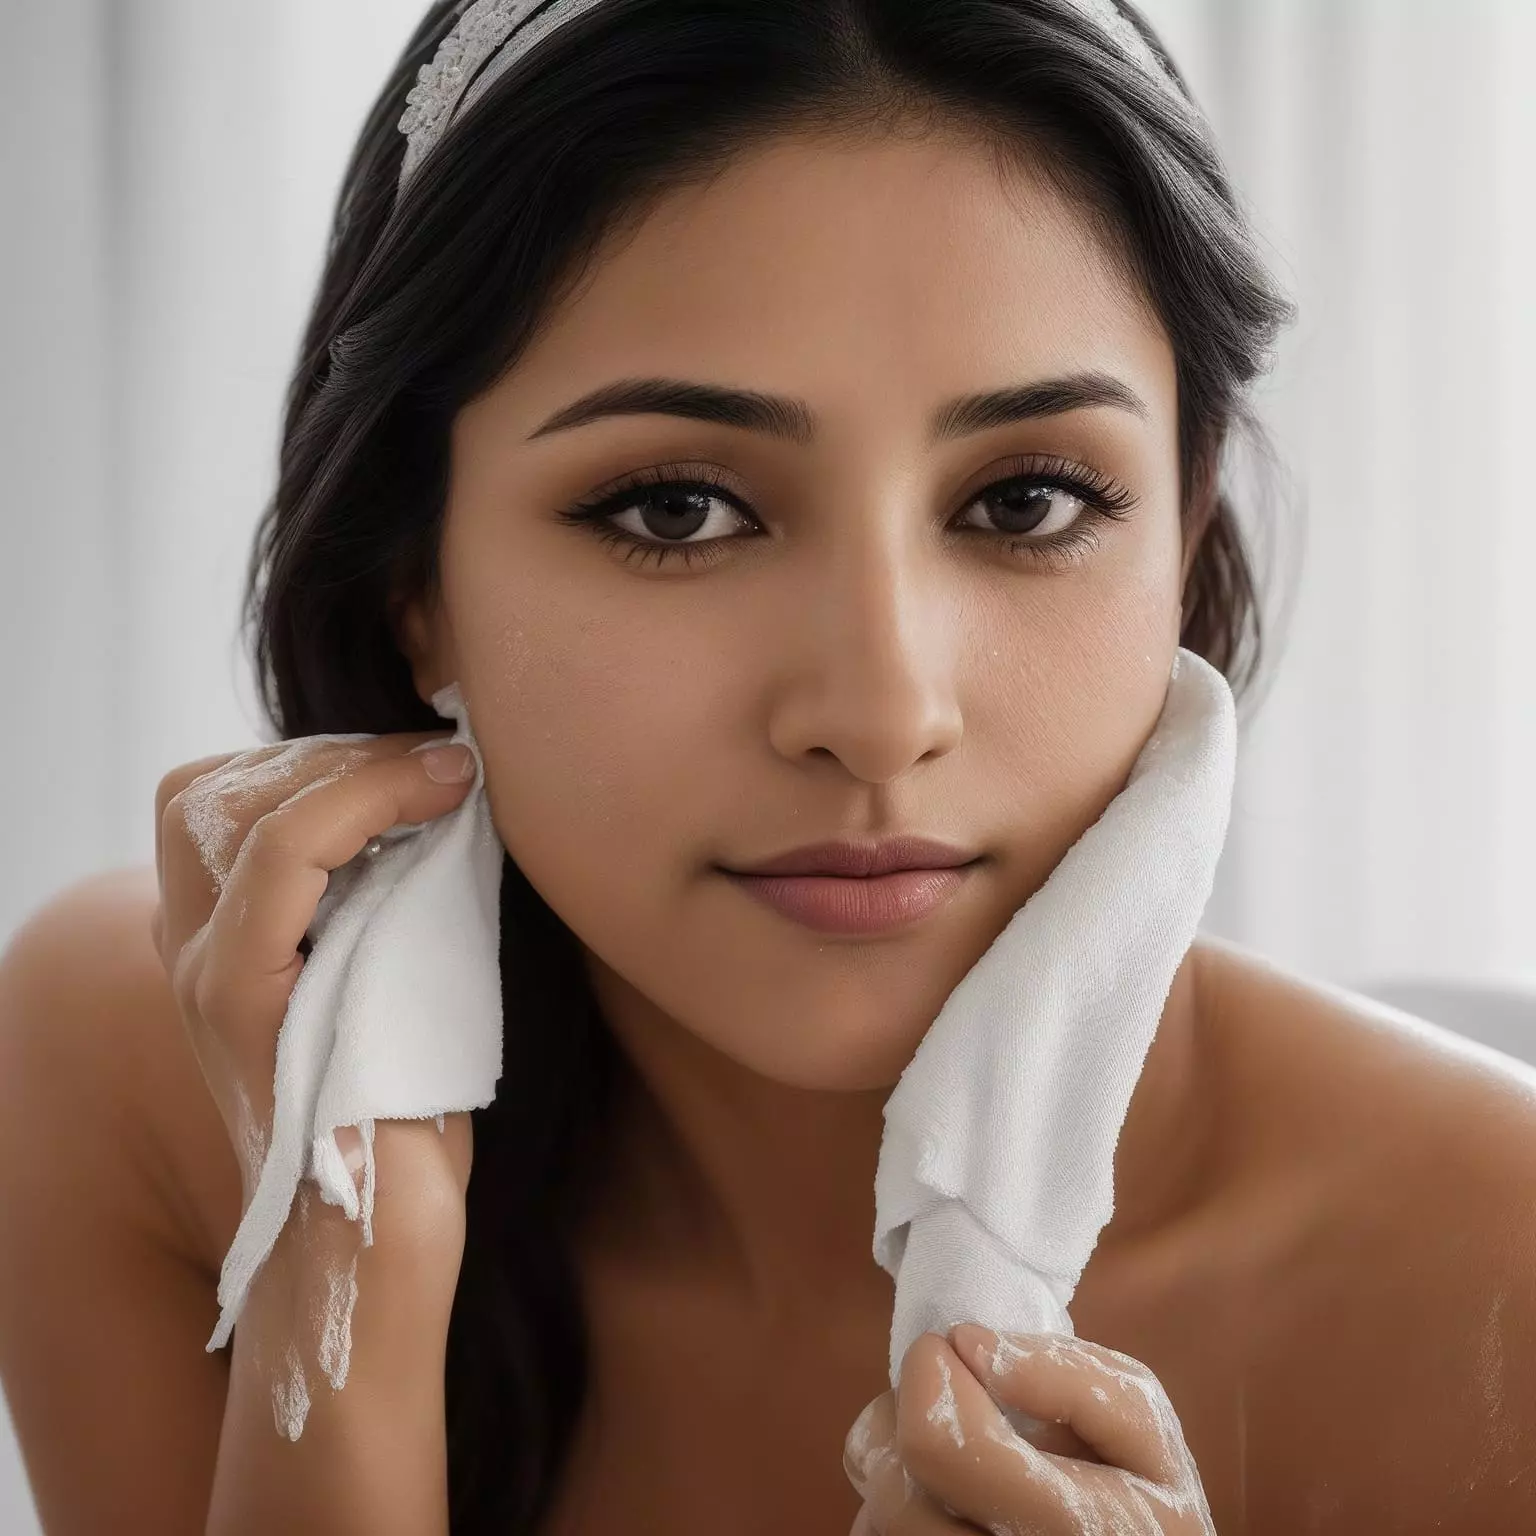 Woman drying her face with a towel